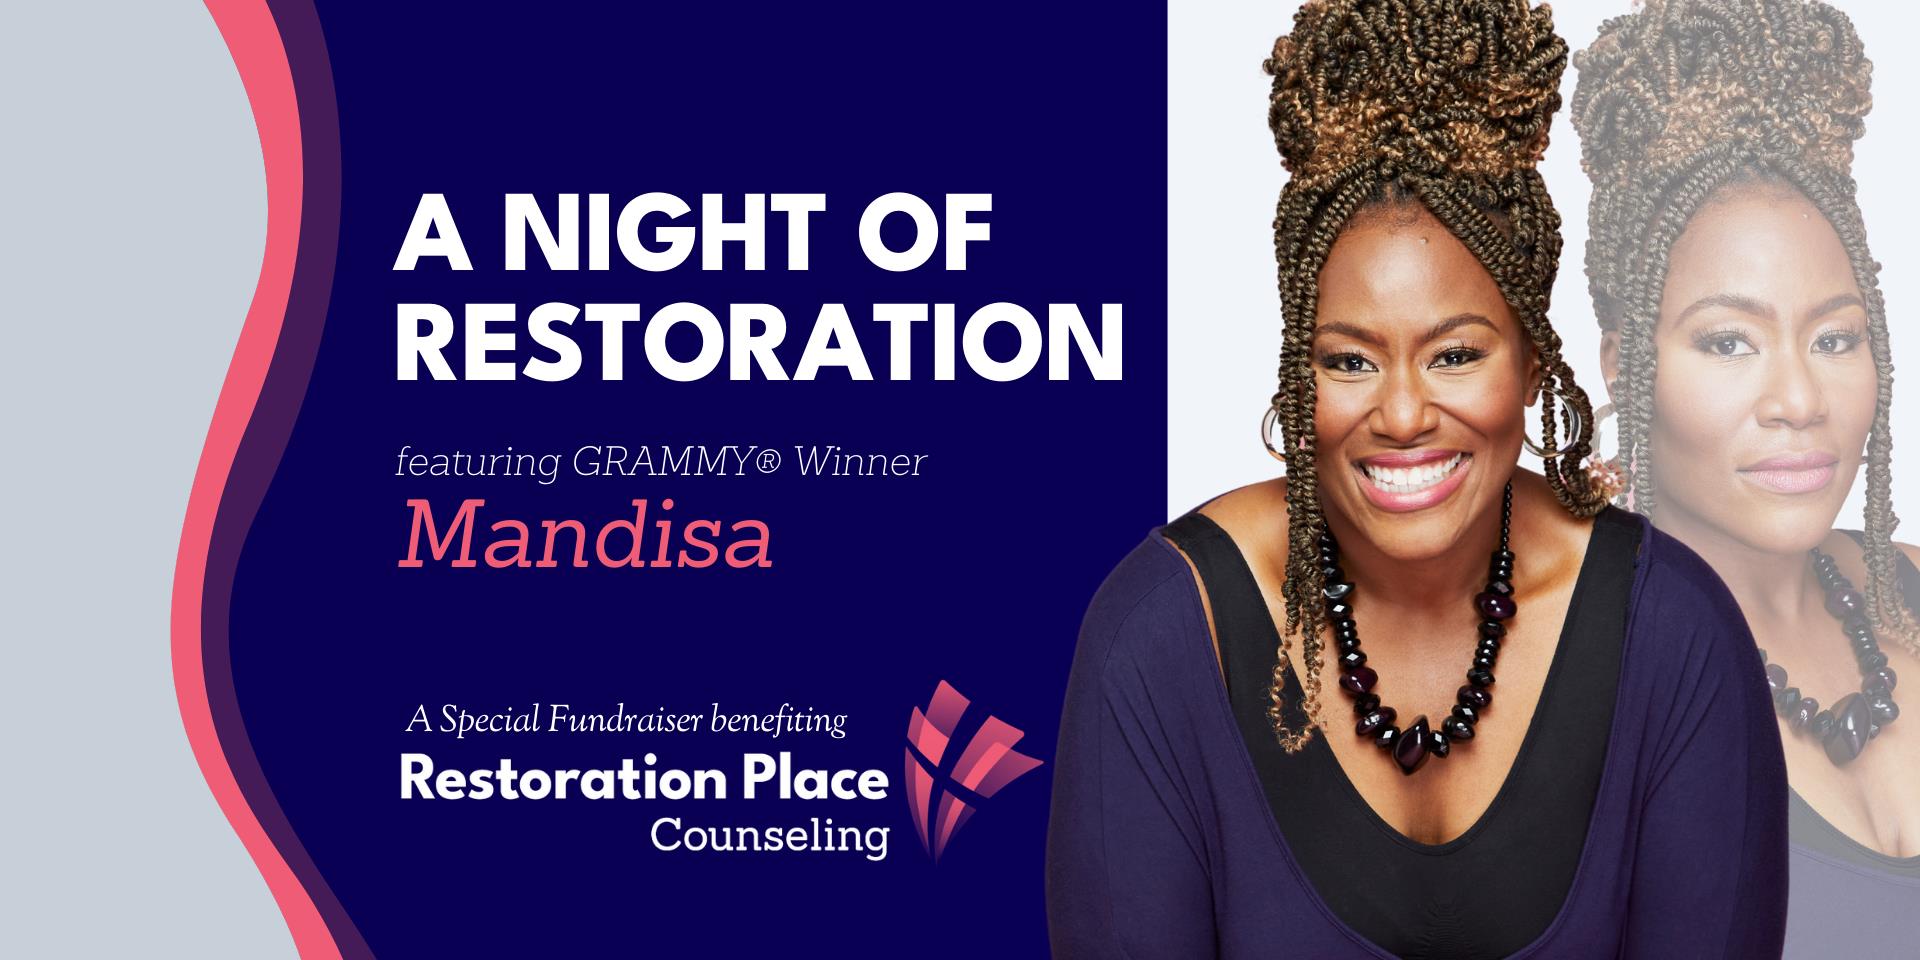 A Night of Restoration - Restoration Place Counseling